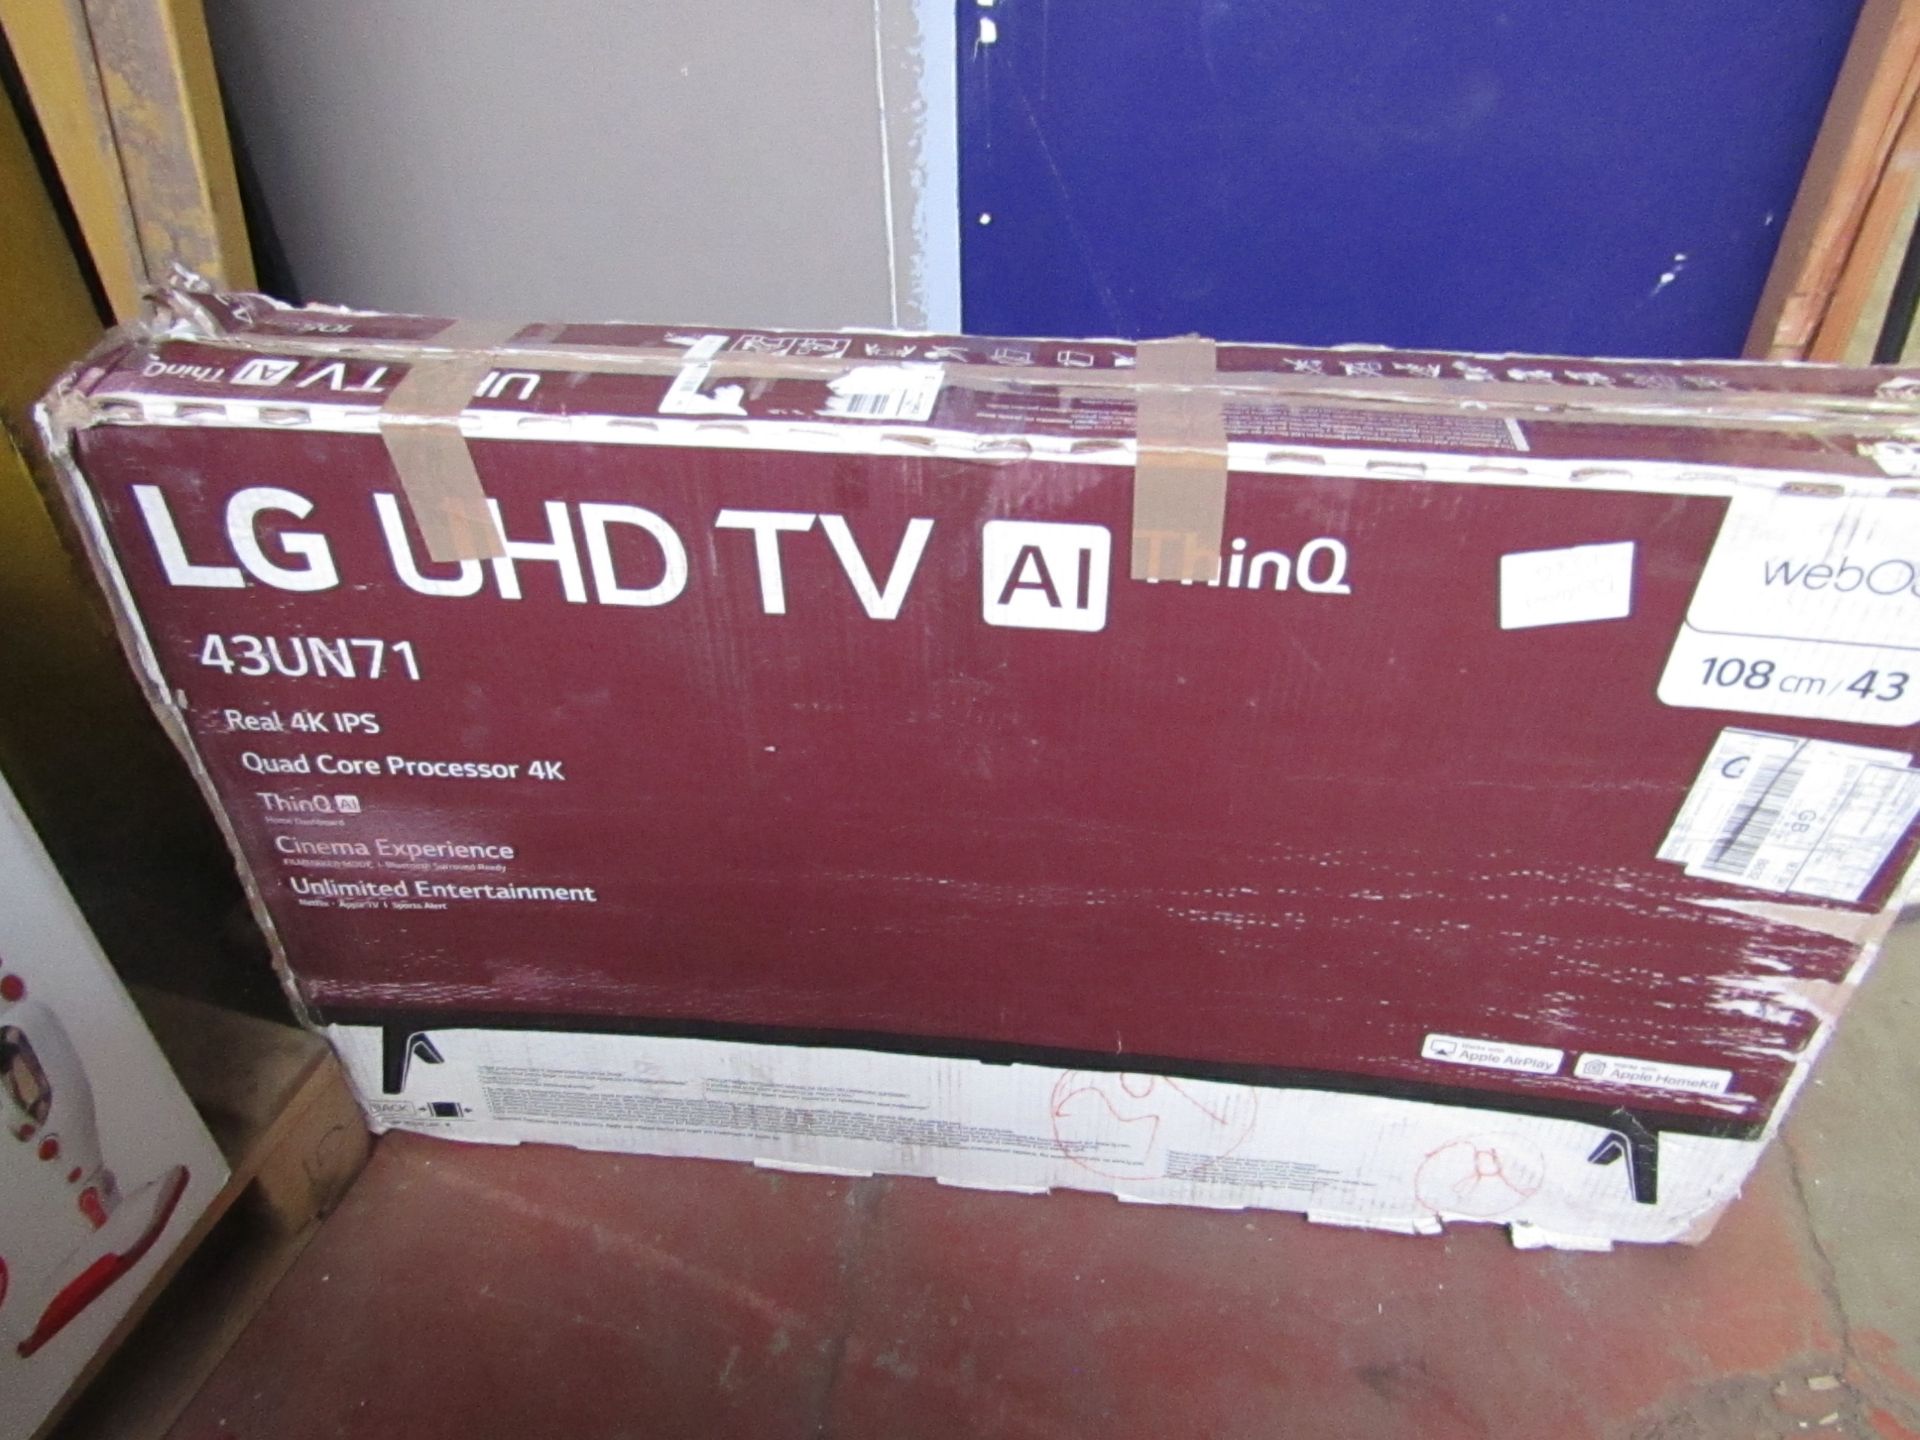 LG - UHD TV Ai ThinQ 43" - Tested Working & Boxed.